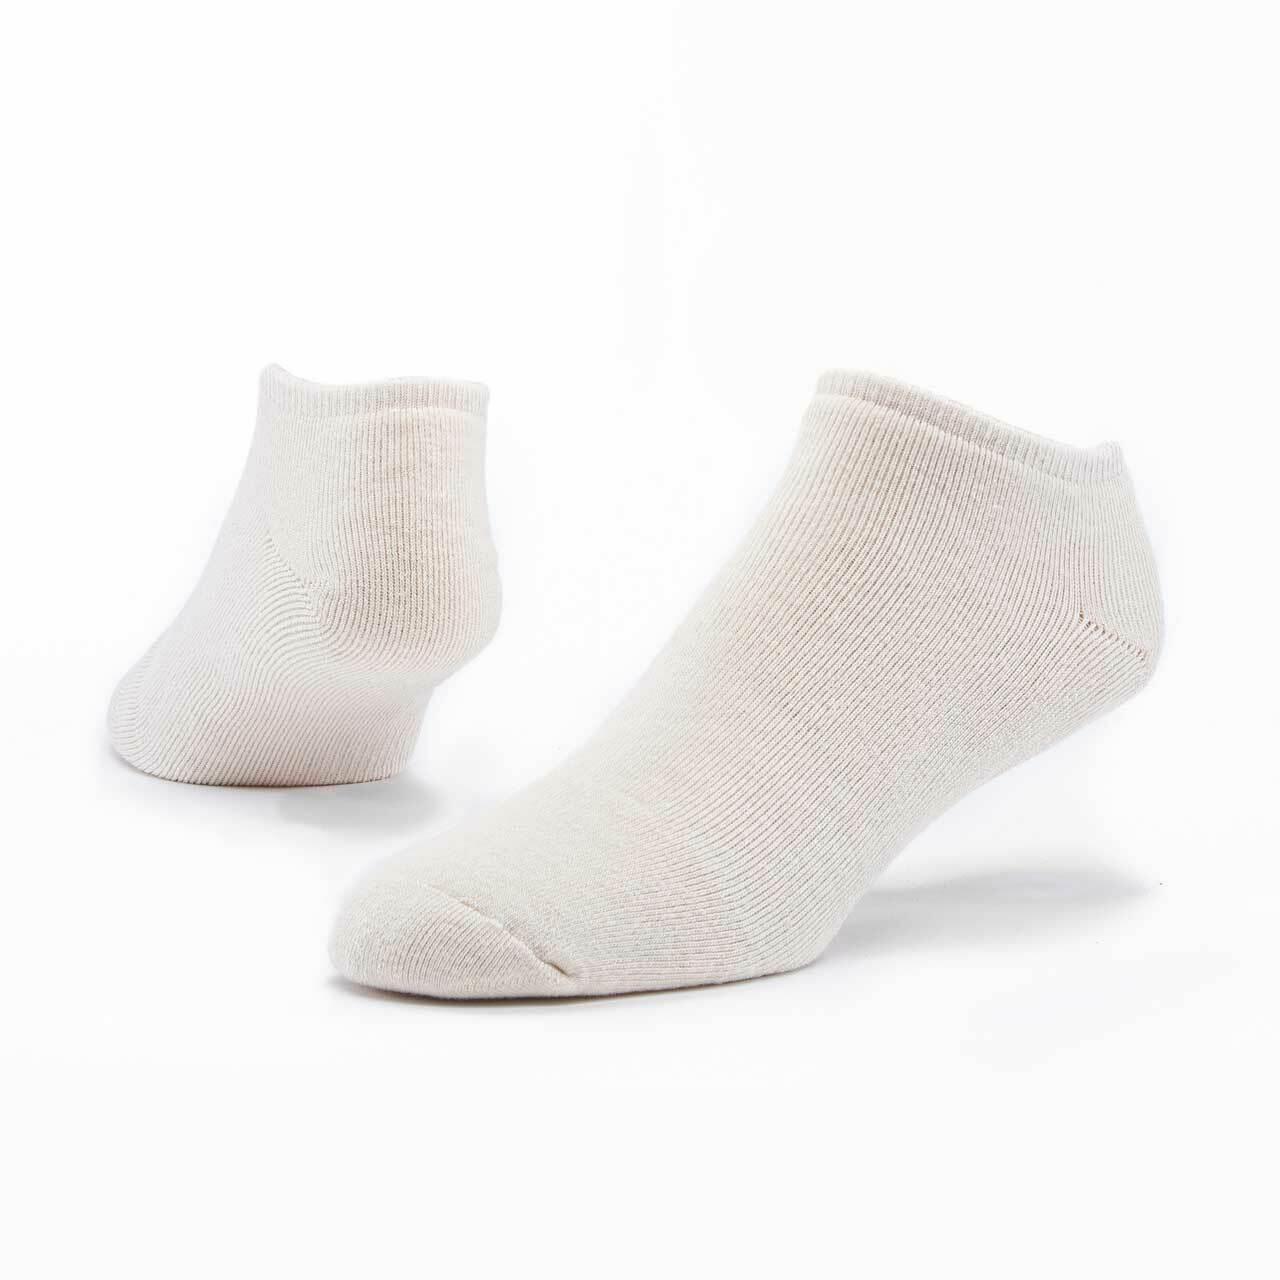 Footie, 81.6% Organic Cotton, Ankle - Maggie's Organics - The Sock Monster